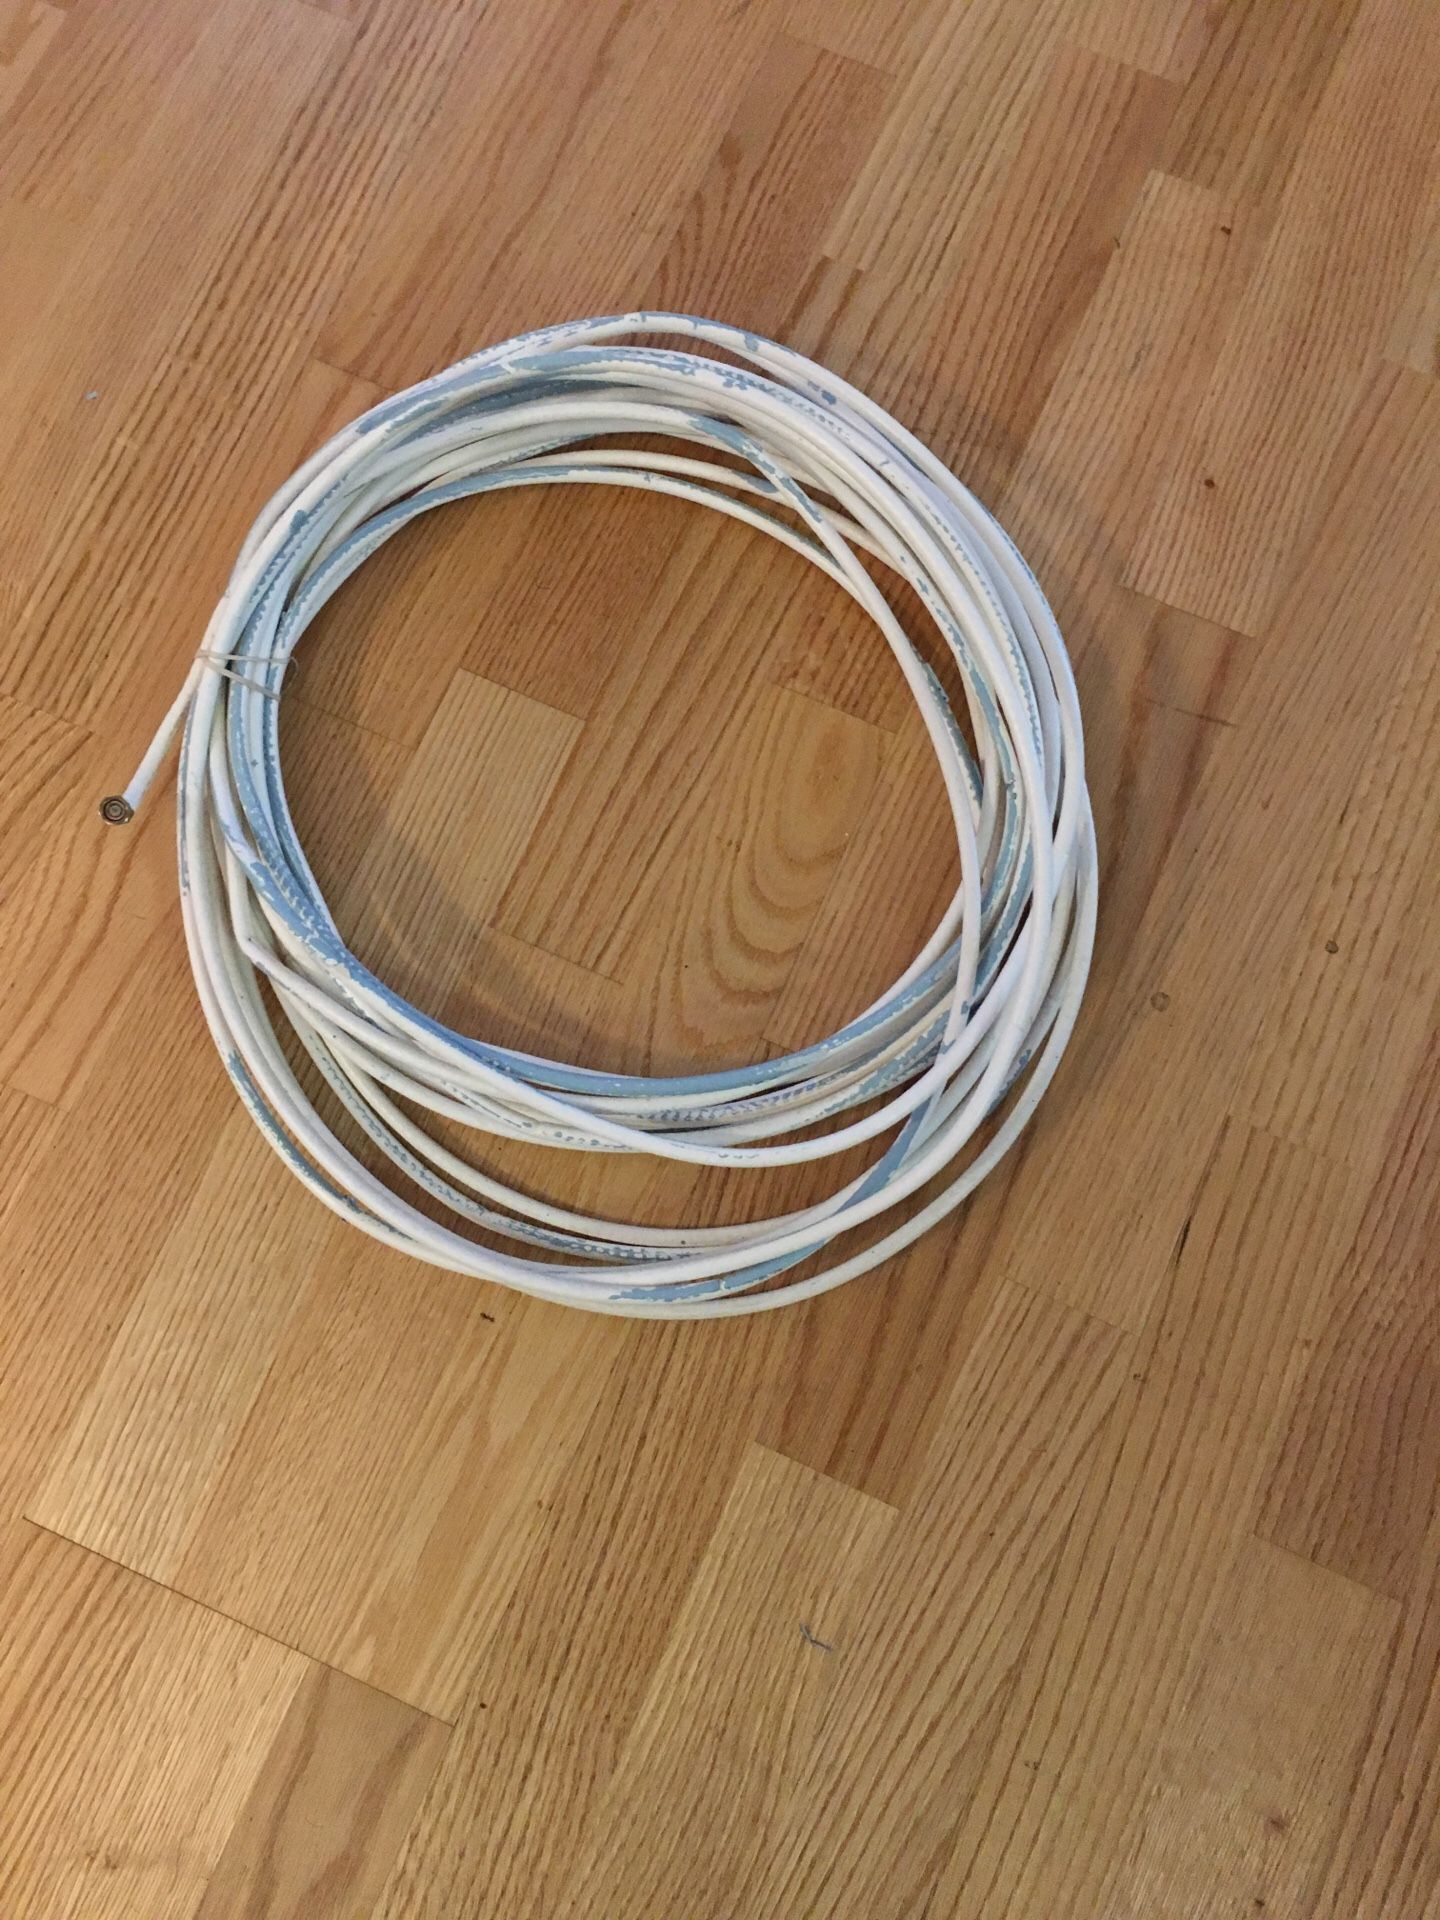 Free coax cable